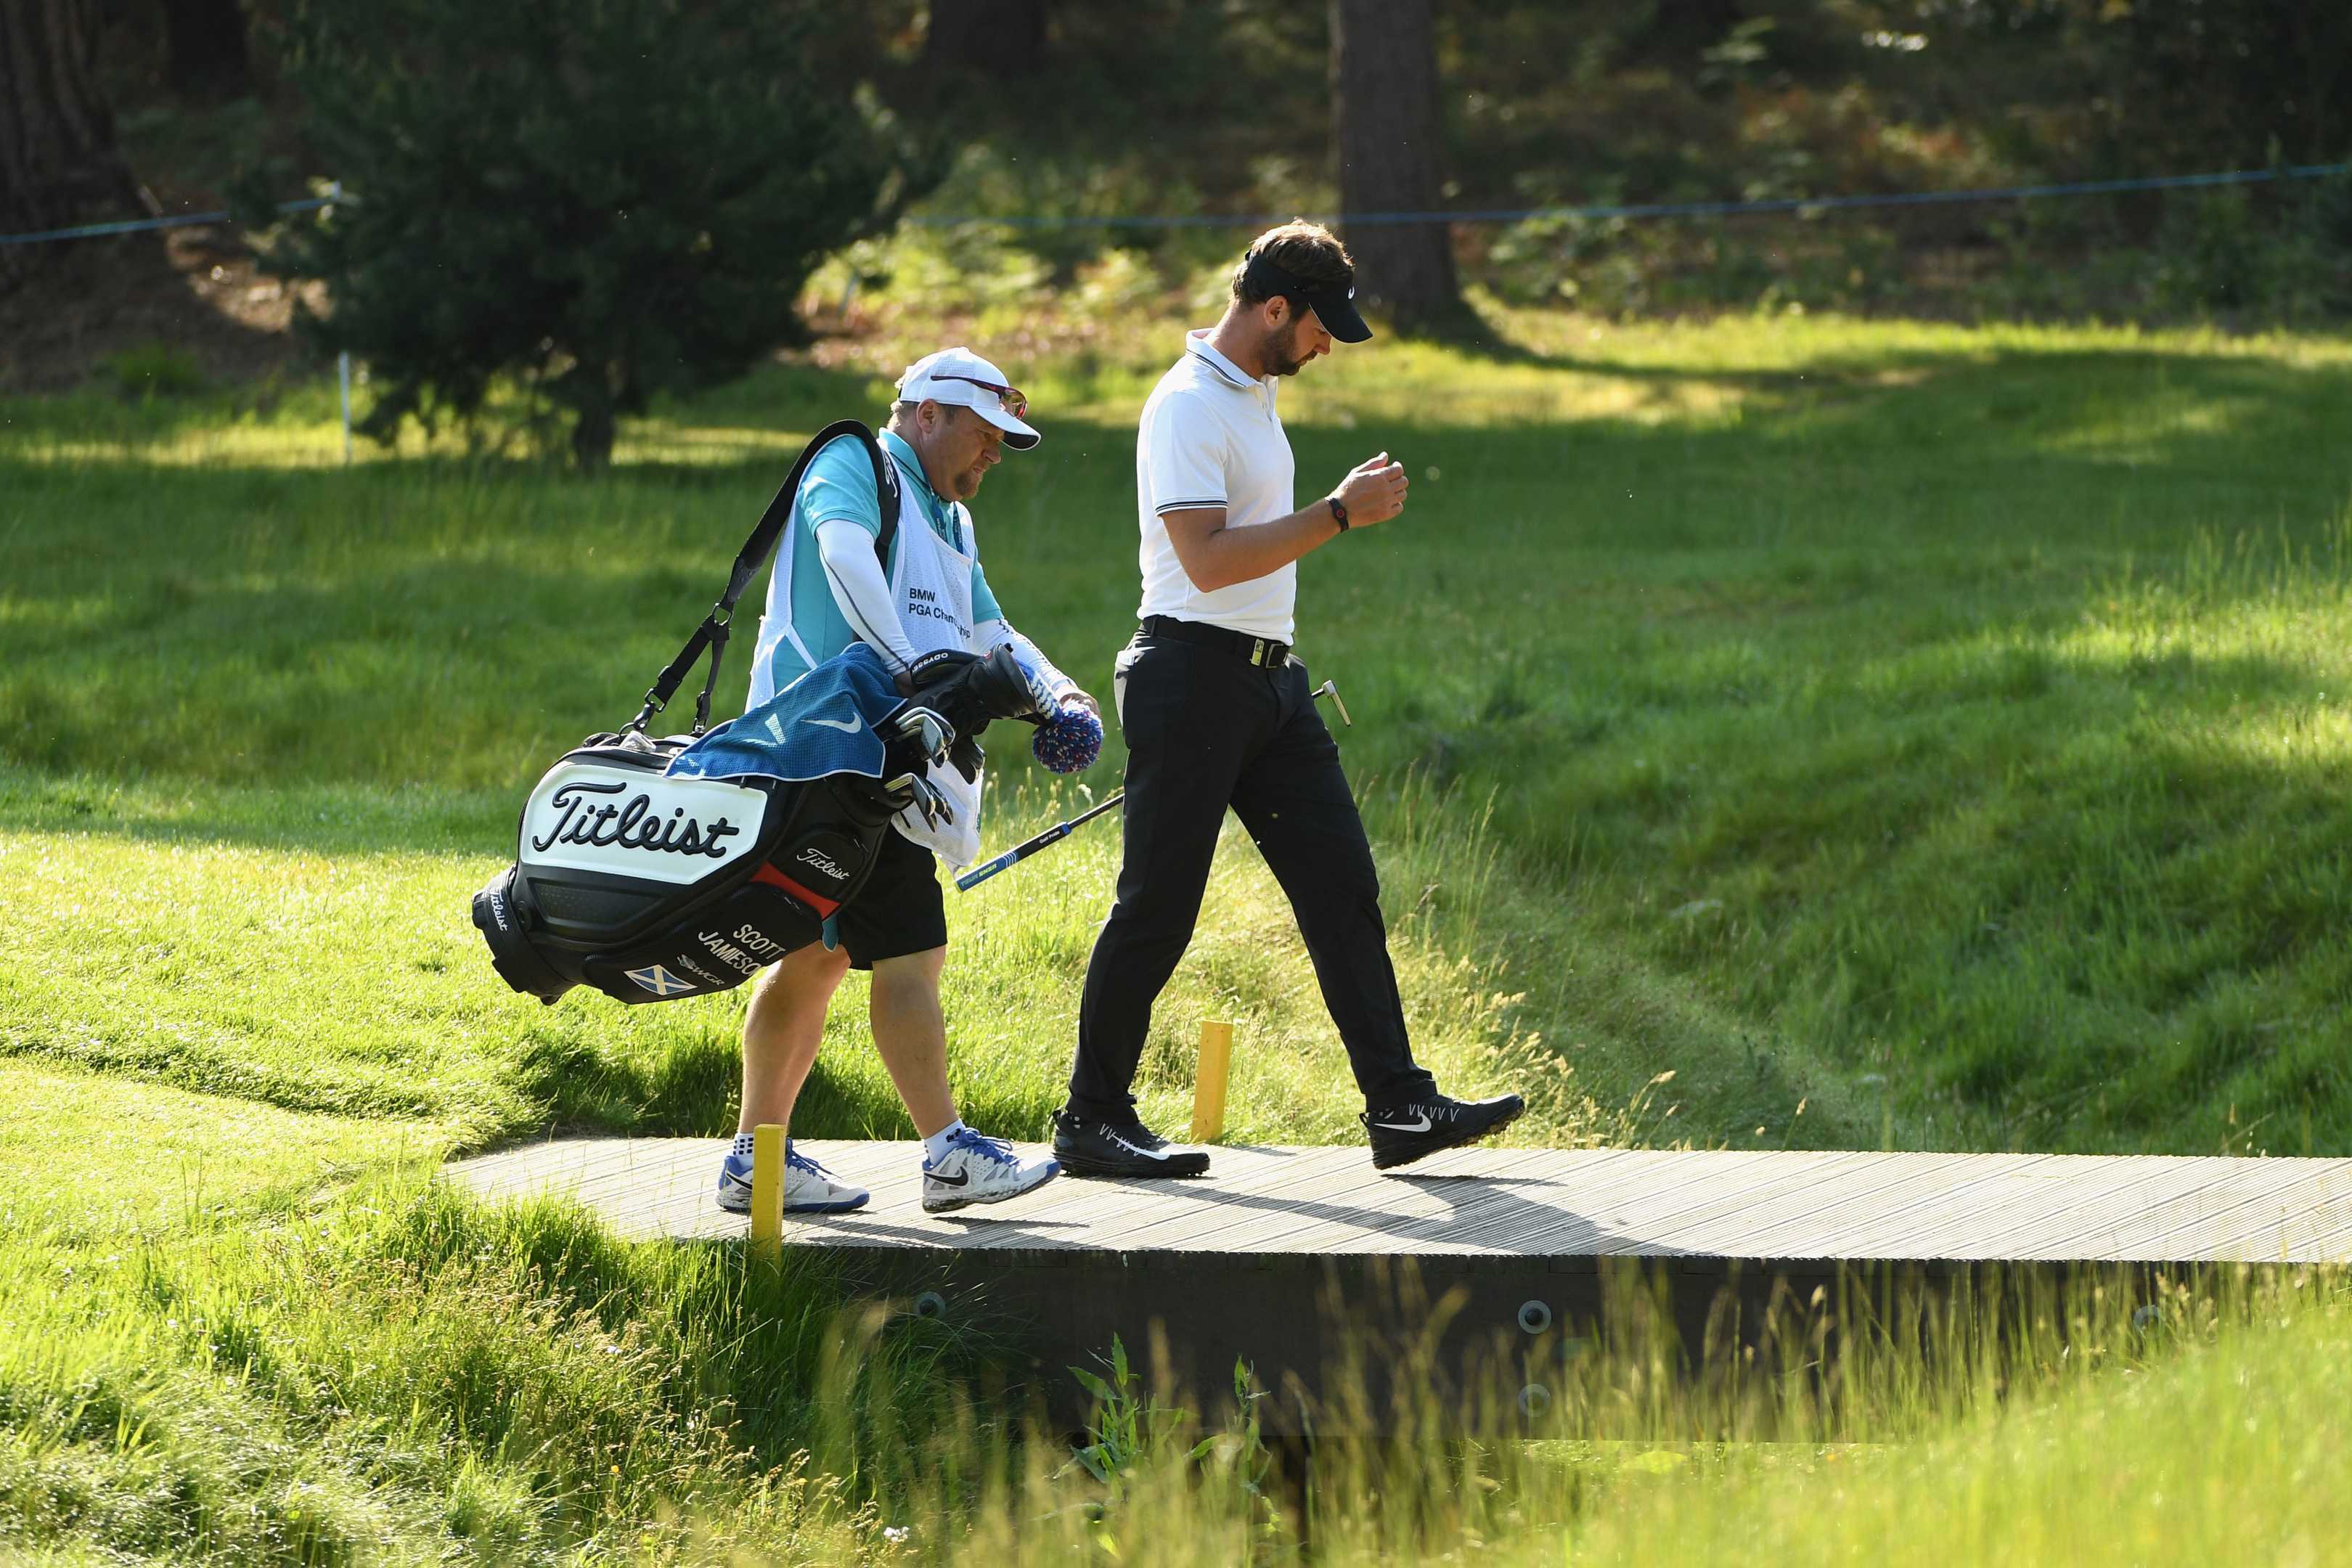 Scott Jamieson was on his own in the lead at Wentworth when disaster struck.